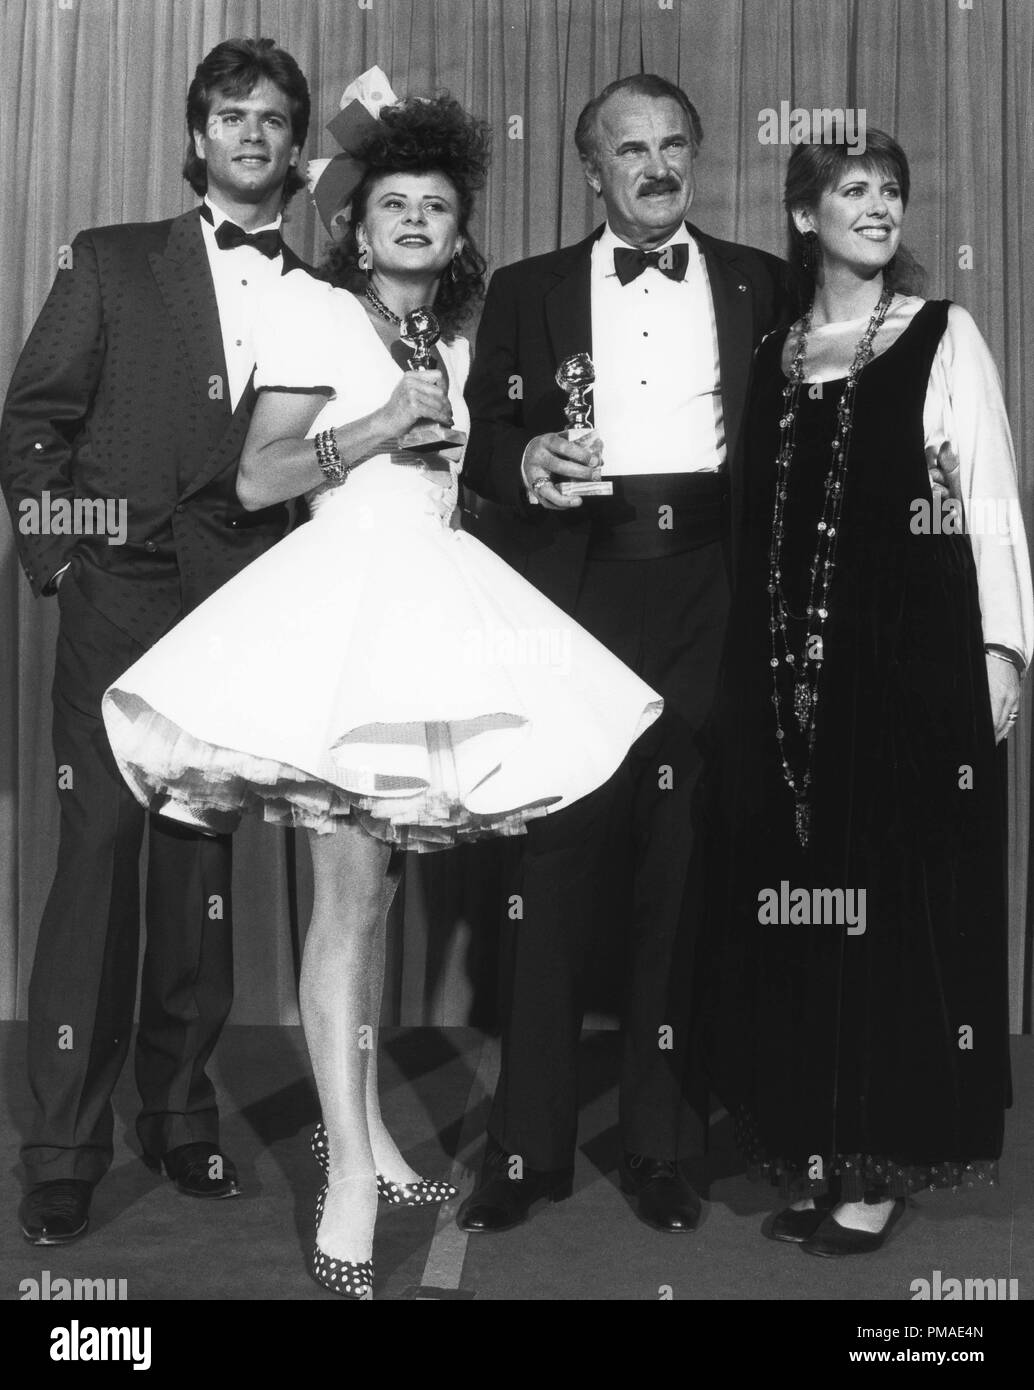 Lorenzo Lamas, Tracey Ullman, Dabney Coleman, Pam Dawber at the 45th Annual Golden Globe Awards, 1988   File Reference # 32509 570THA Stock Photo